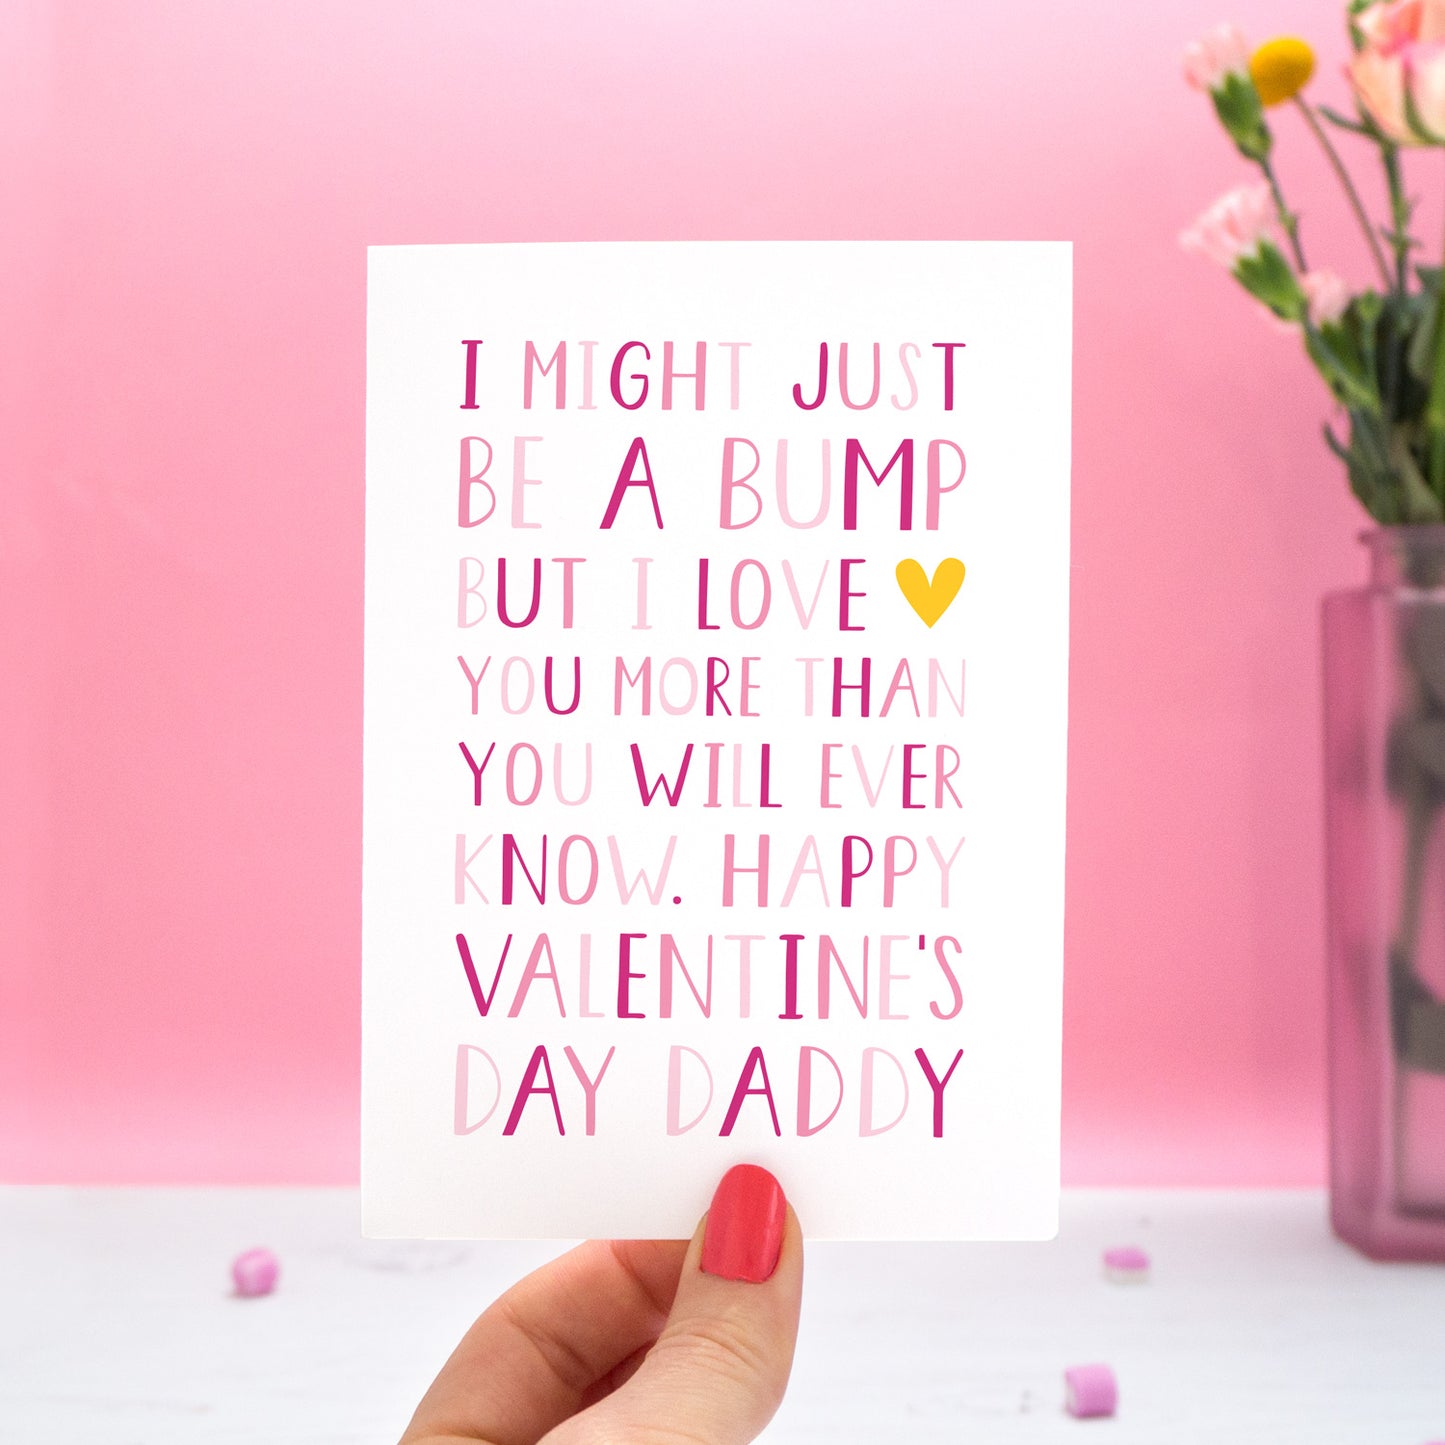 A valentine's card from the 'bump' with text in different shades of pink that reads "I might just be a bump but I love you more thank you will ever know. Happy Valentine's day Daddy." The card is held in one hand and there is a vase of flowers in the pink background.